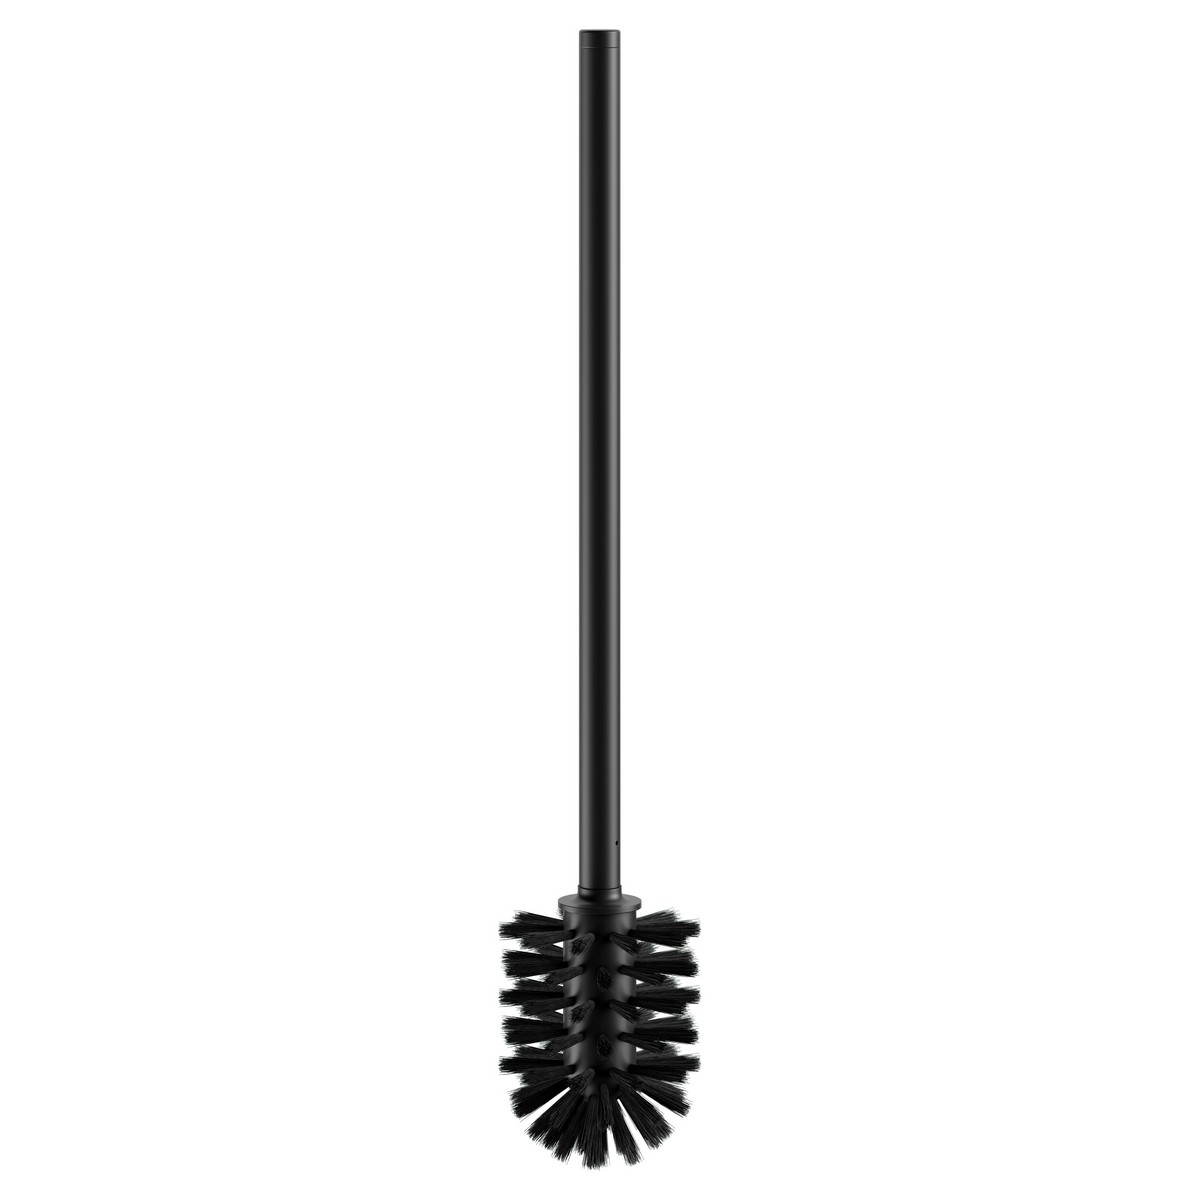 KEUCO 19964370013 EDITION 11 TOILET BRUSH WITH HANDLE IN MATTE BLACK